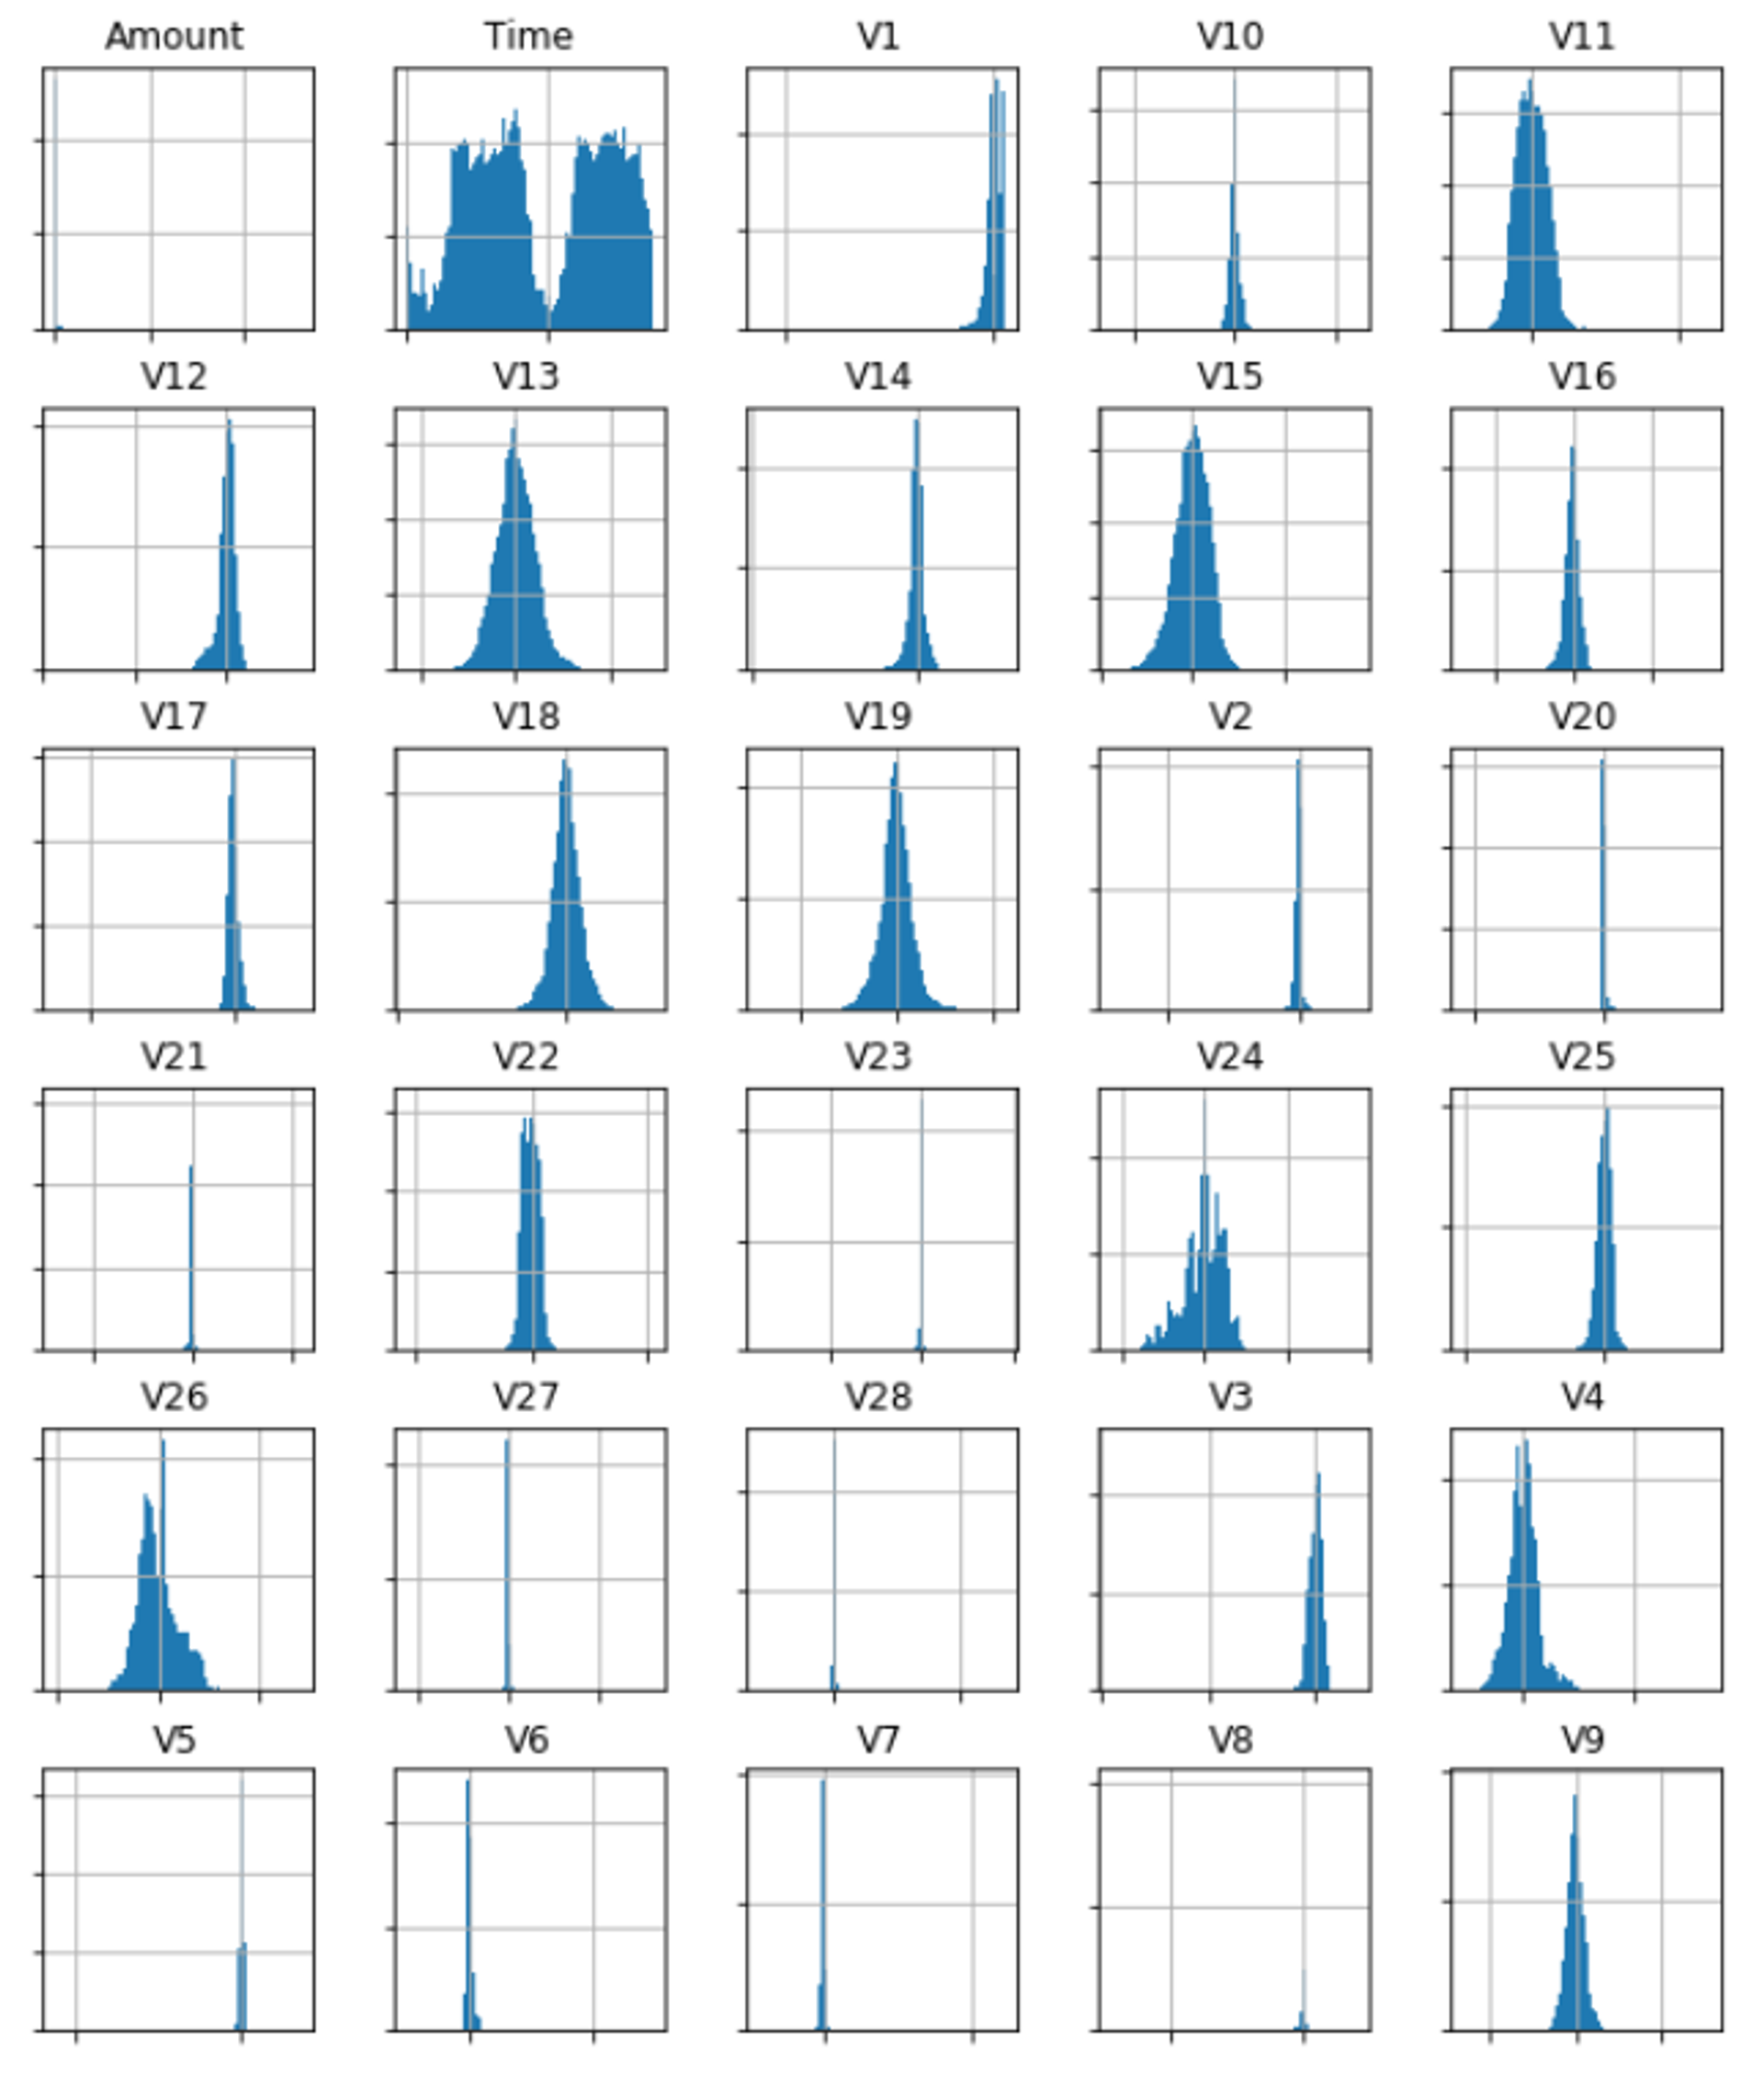 Histograms for all independent variables from the dataset